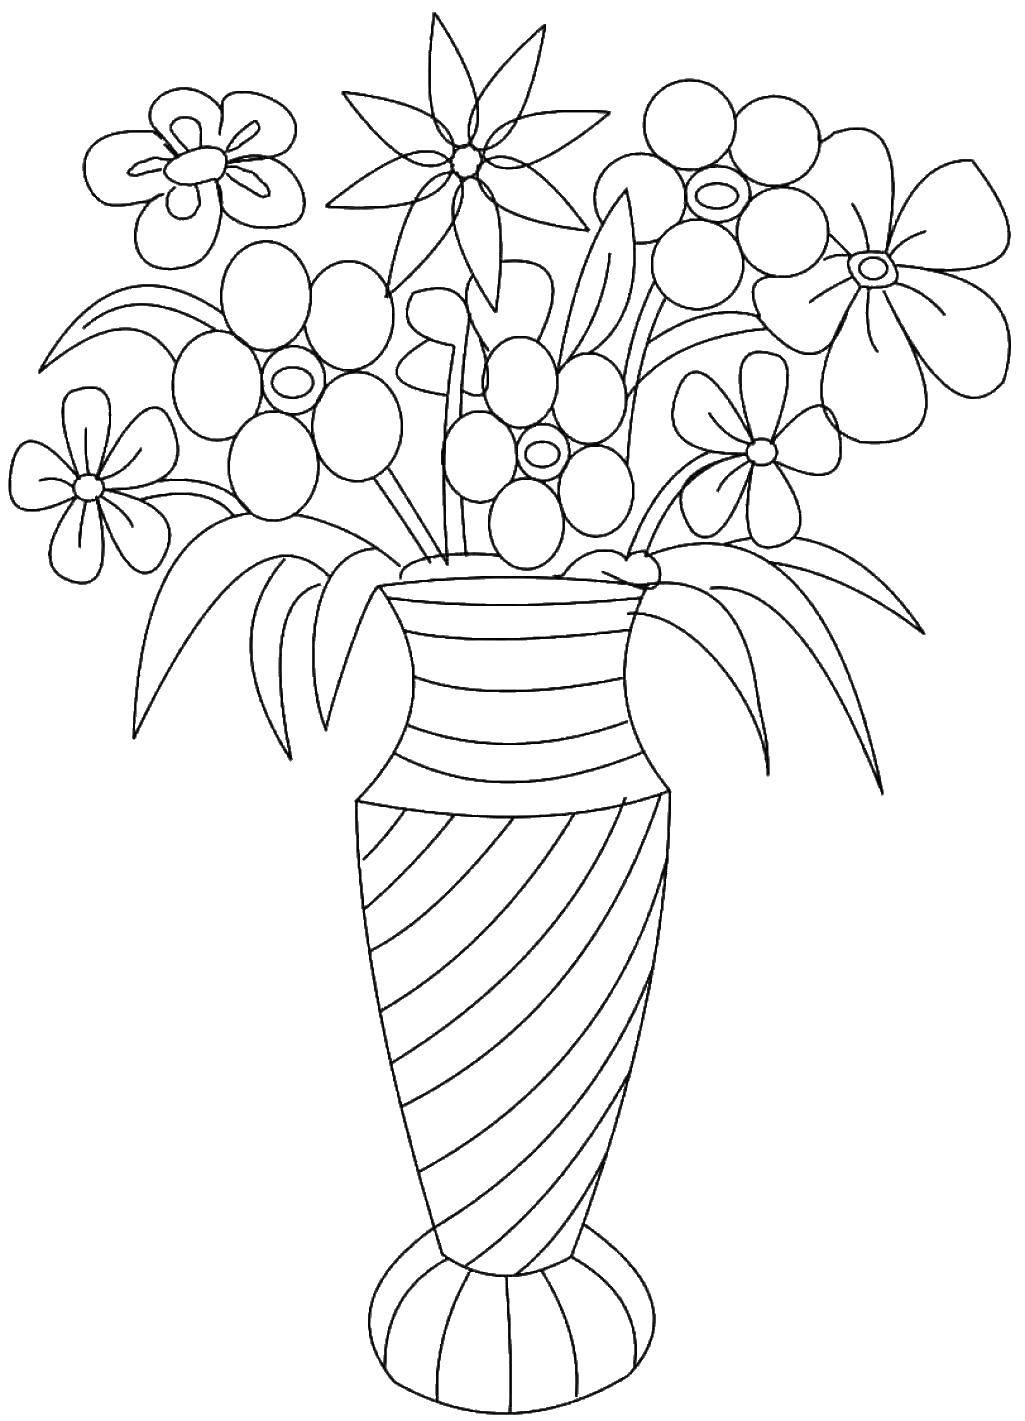 Coloring Striped vase with flowers. Category flowers. Tags:  Flowers, bouquet, vase.